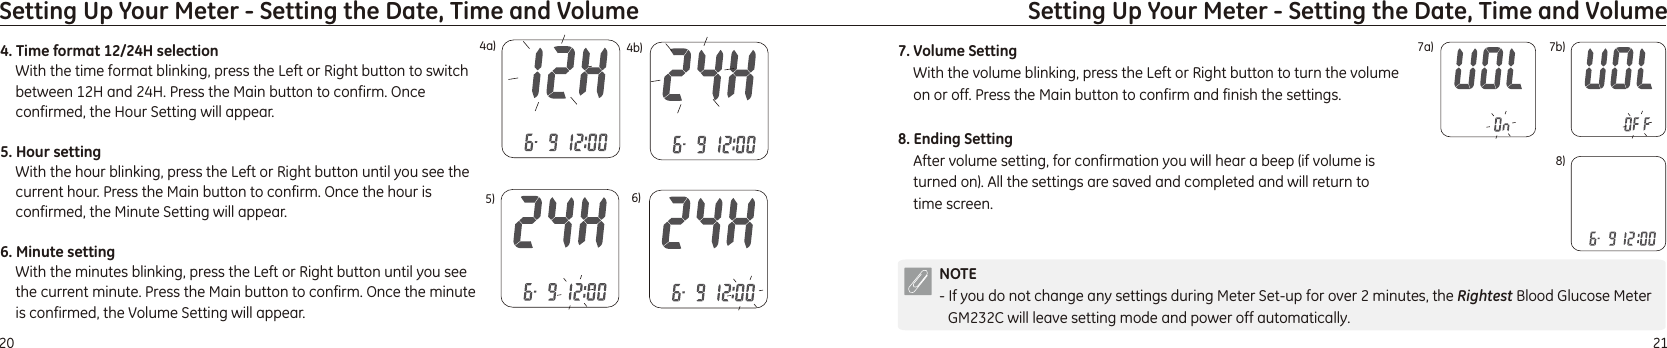 2120Setting Up Your Meter - Setting the Date, Time and VolumeSetting Up Your Meter - Setting the Date, Time and Volume4. Time format 12/24H selectionWith the time format blinking, press the Left or Right button to switch between 12H and 24H. Press the Main button to confirm. 5. Hour settingWith the hour blinking, press the Left or Right button until you see the current hour. Press the Main button to confirm. 6. Minute settingWith the minutes blinking, press the Left or Right button until you see the current minute. Press the Main button to confirm. Once confirmed, the Hour Setting will appear. Once the hour is confirmed, the Minute Setting will appear.Once the minute is confirmed, the Volume Setting will appear.5) 6)4a) 4b)NOTE- If you do not change any settings during Meter Set-up for over 2 minutes, the  Blood Glucose Meter GM232C will leave setting mode and power off automatically. Rightest7a) 7b)7. Volume SettingWith the volume blinking, press the Left or Right button to turn the volume on or off. Press the Main button to confirm and finish the settings.8. Ending SettingAfter volume setting, for confirmation you will hear a beep (if volume is turned on). All the settings are saved and completed and will return to time screen. 8)